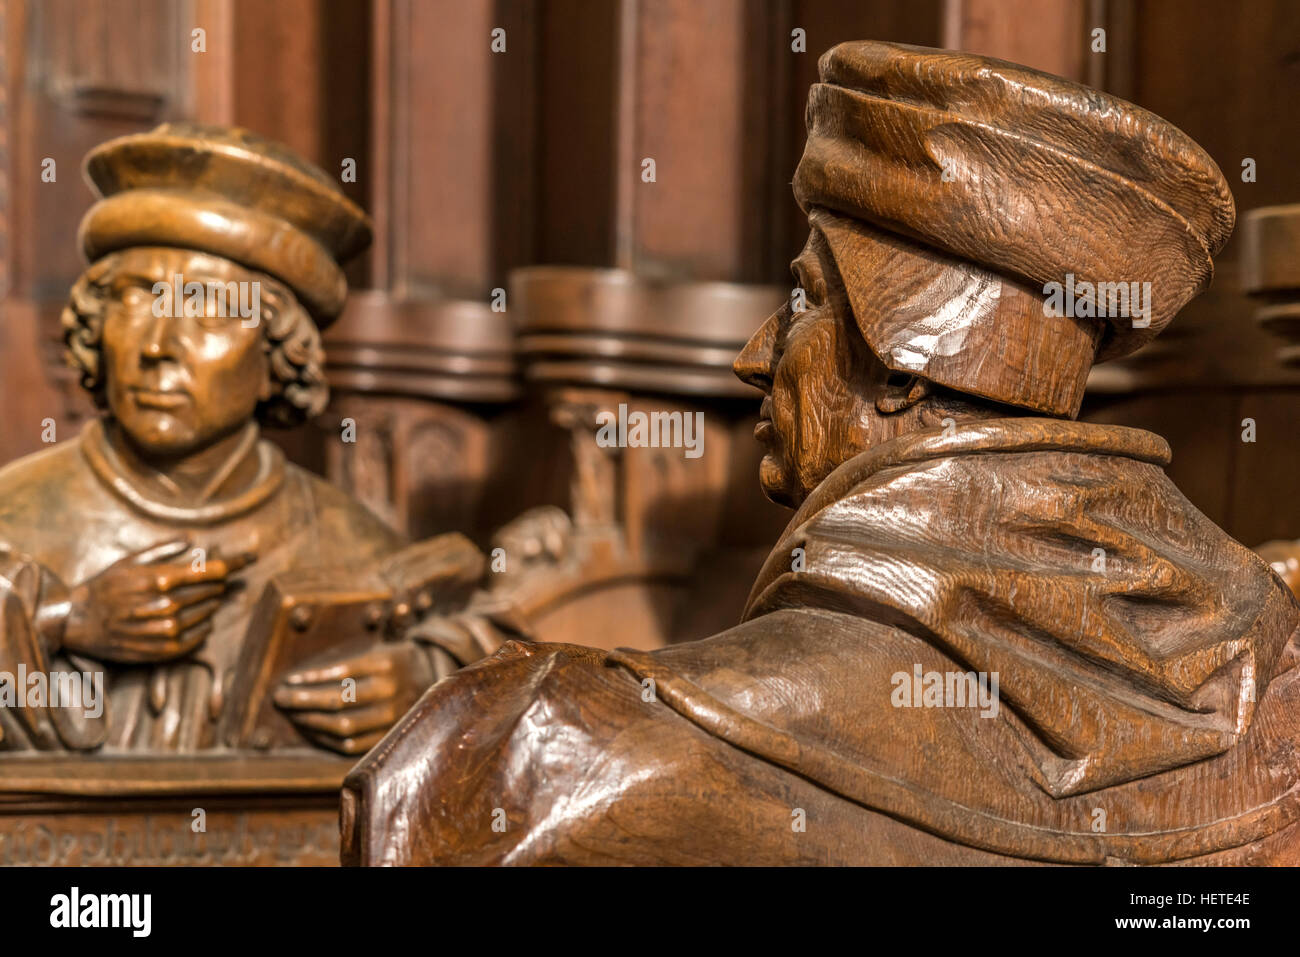 choir stalls with carved busts,  Ulm Minster interior, Ulm, Baden-Württemberg, Germany, Europe Stock Photo